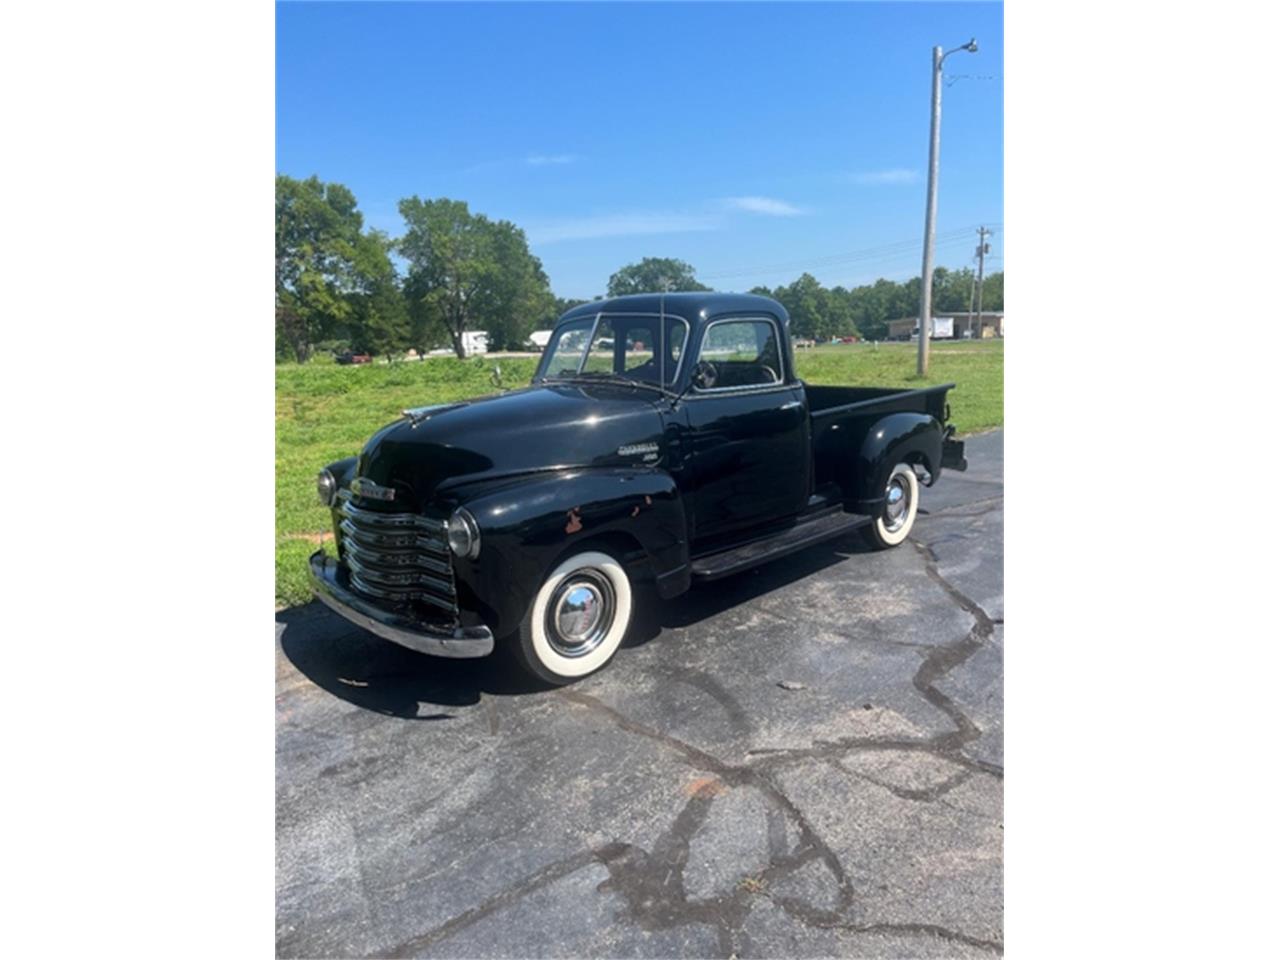 For Sale at Auction: 1949 Chevrolet 3100 in Shawnee, Oklahoma for sale in Shawnee, OK